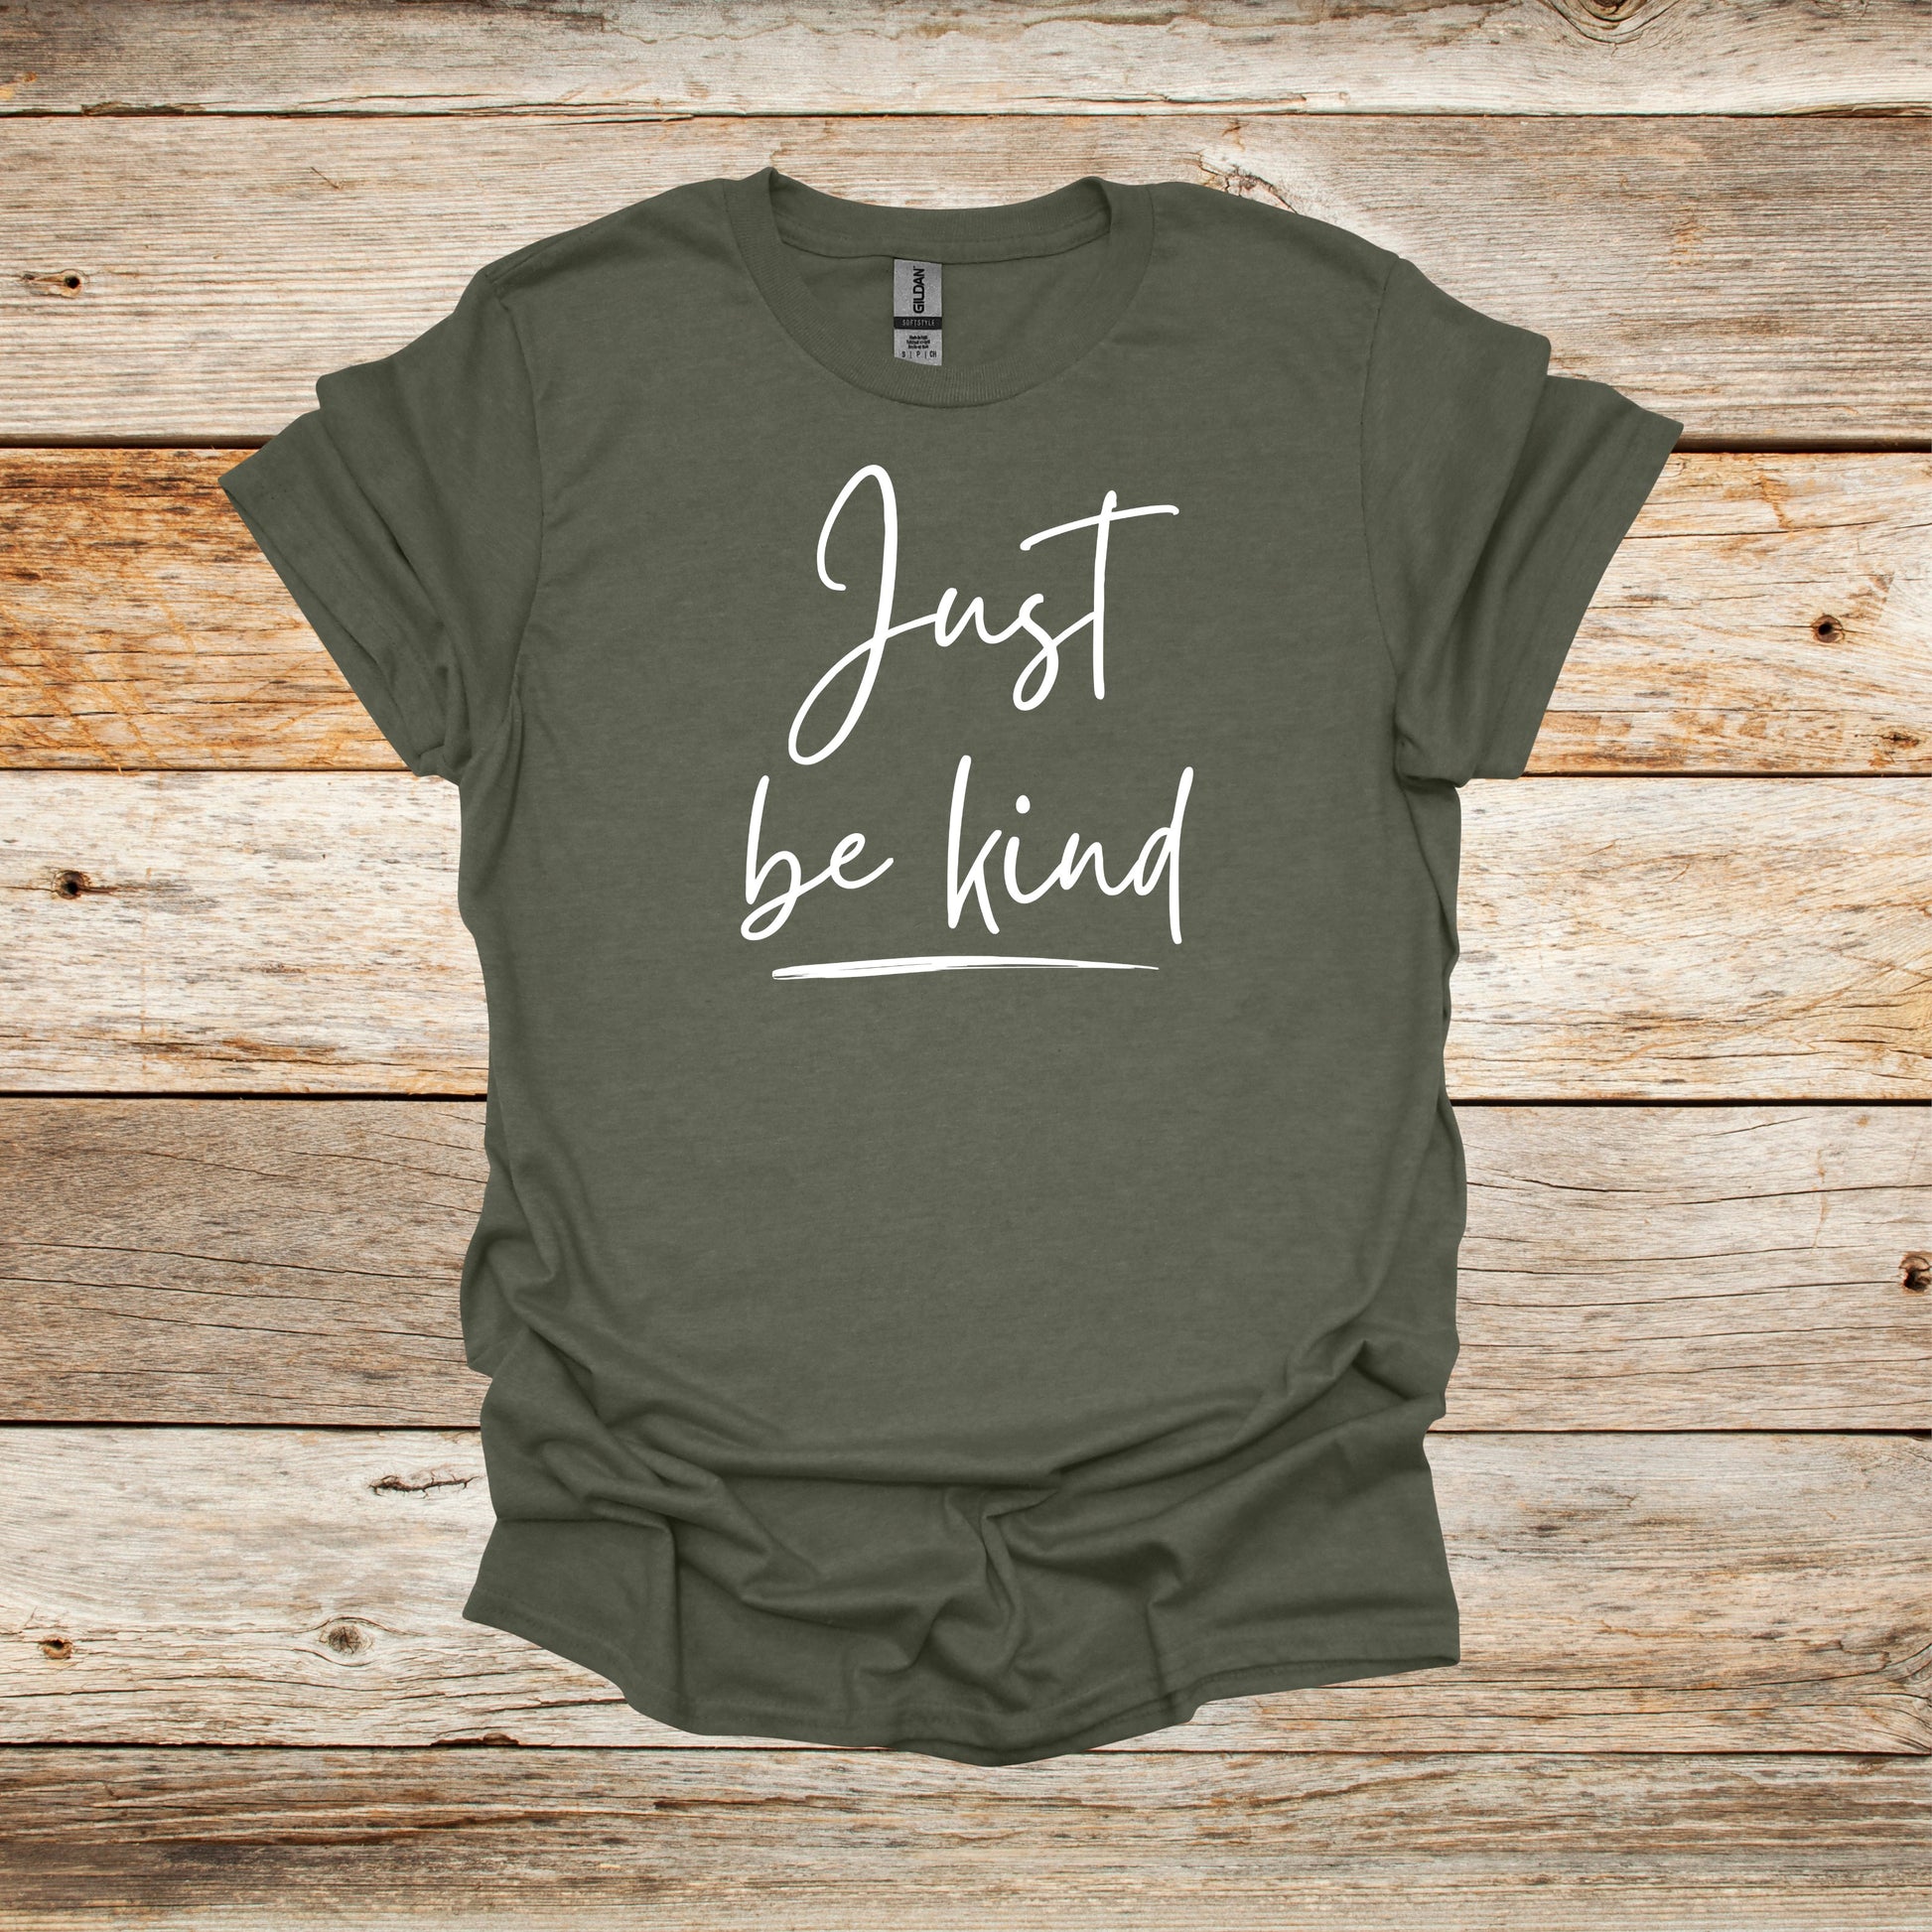 Sayings T-Shirt - Just Be Kind - Men's and Women's Tee Shirts - Sayings T-Shirts Graphic Avenue Heather Military Green Adult Small 